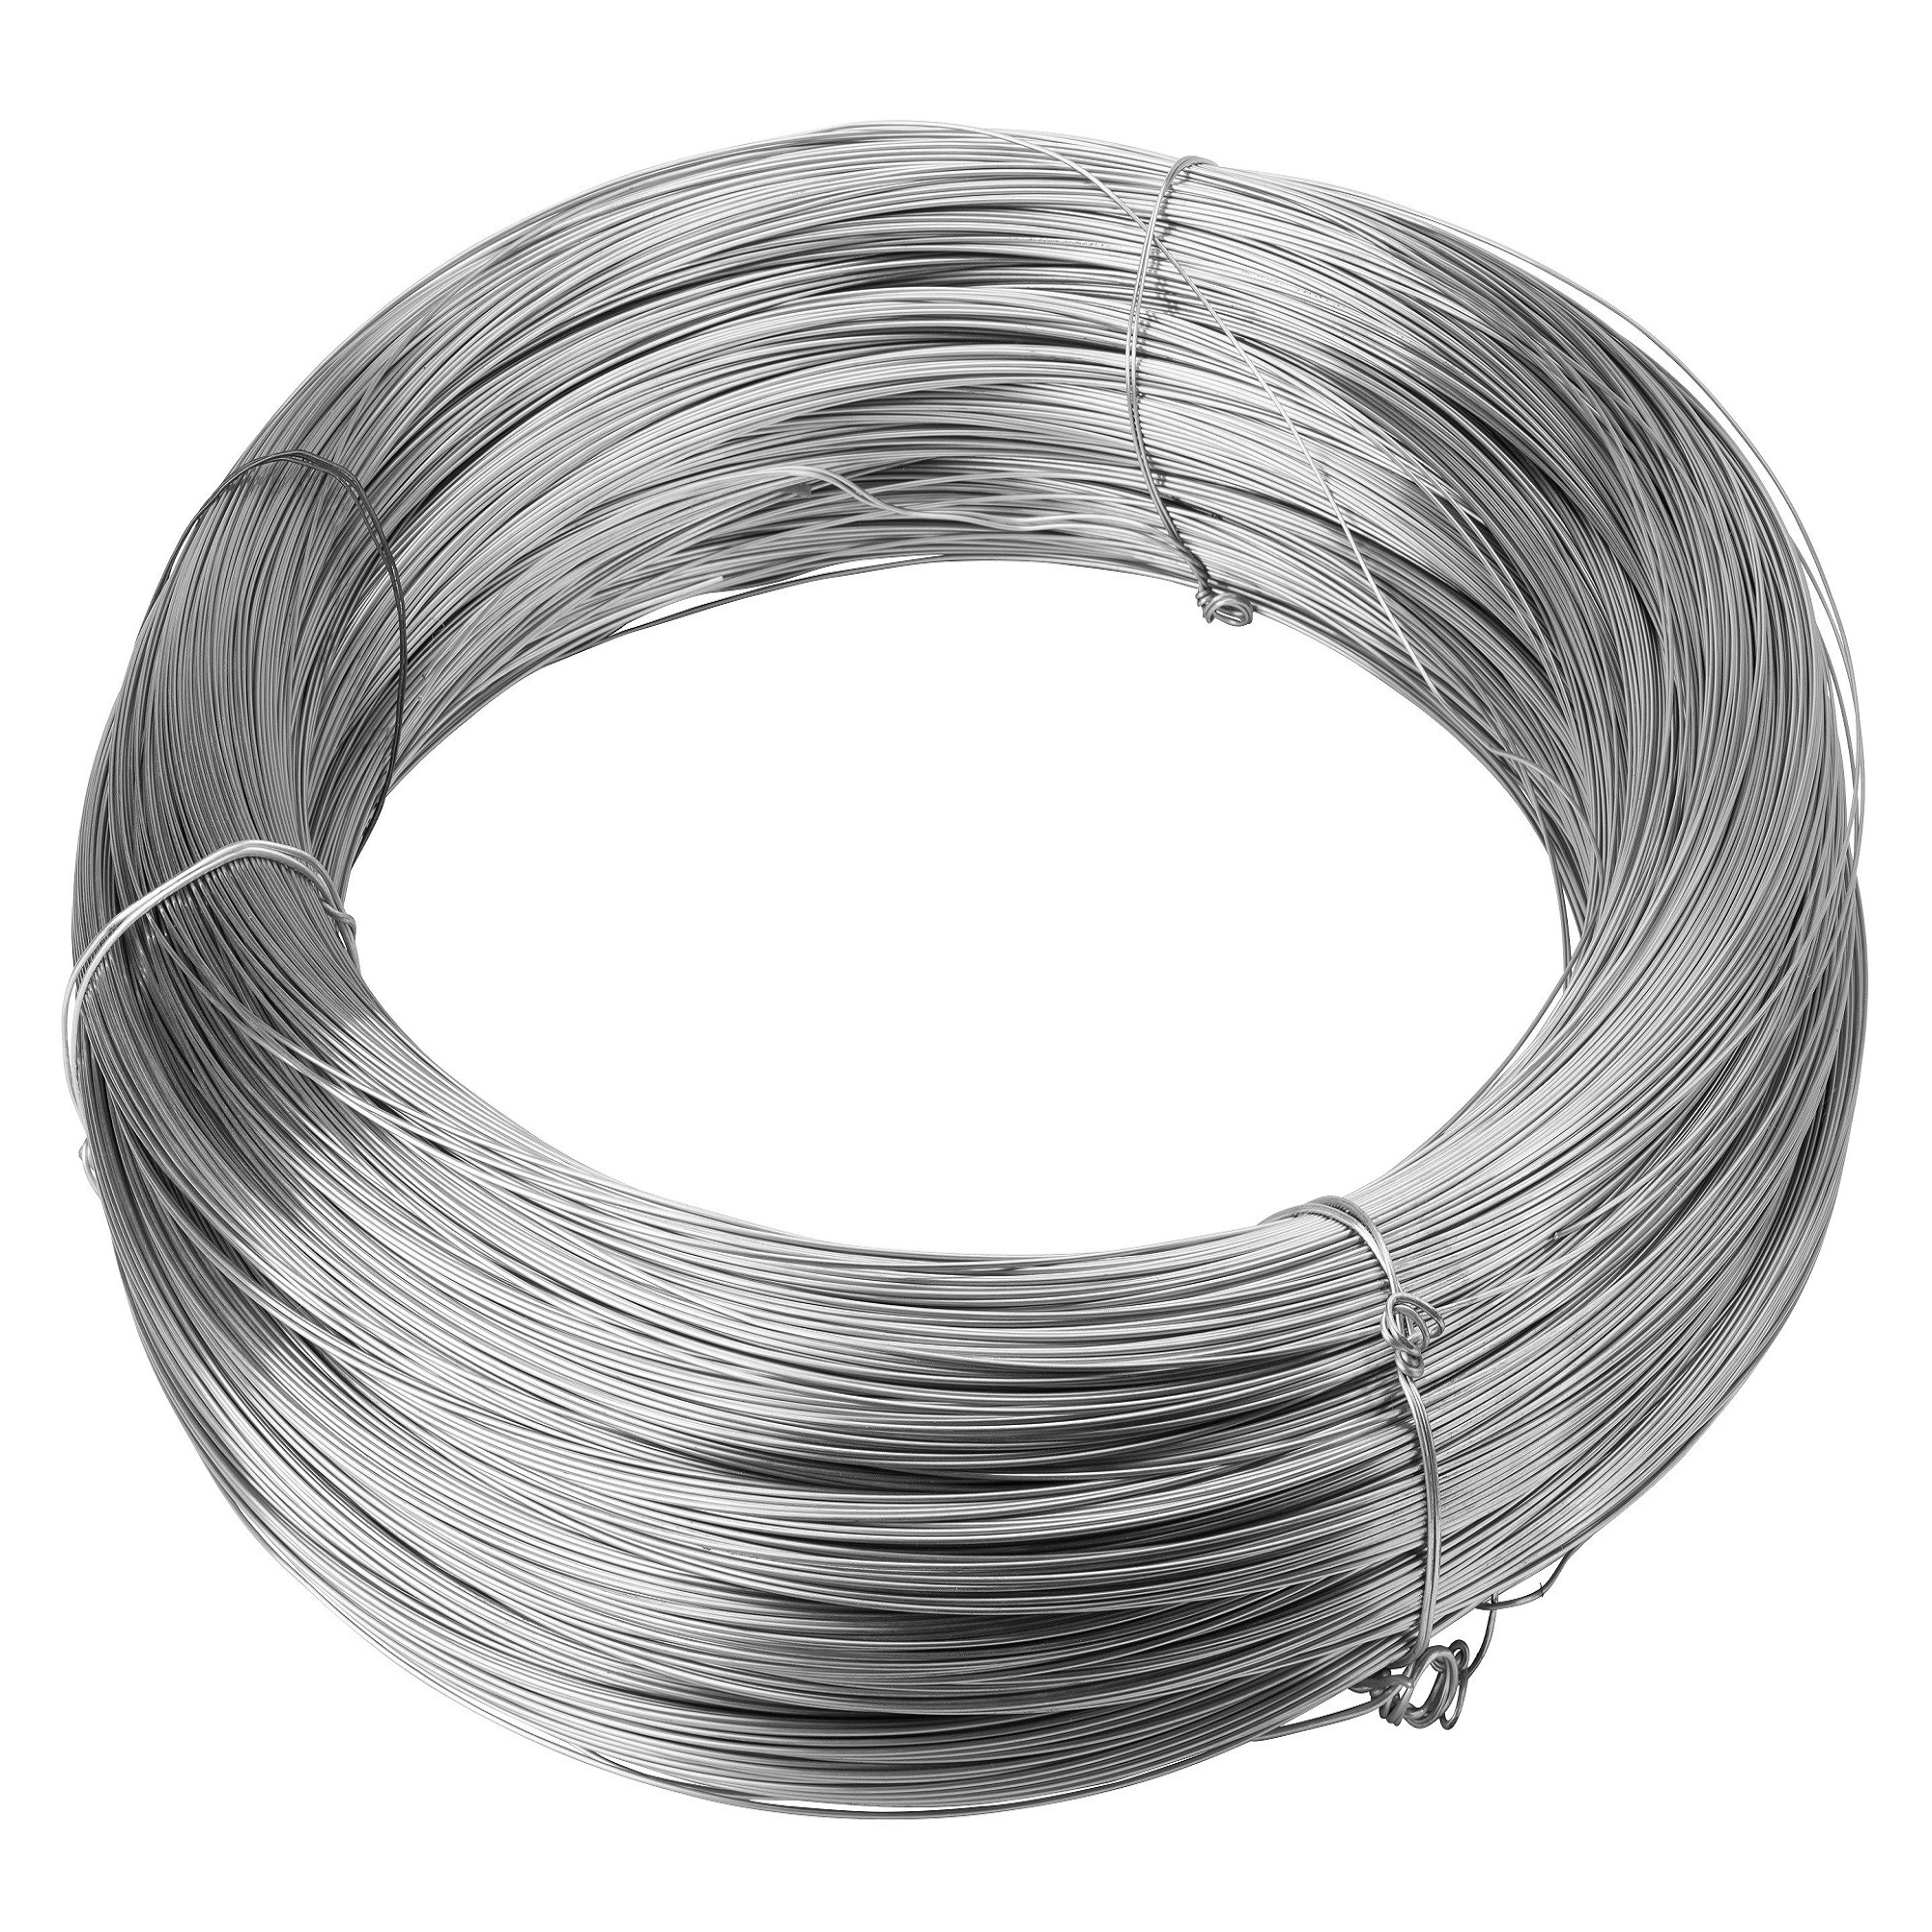 /?products/Stainless_steel_accessories/Stainless-Steel-Tie-Wires.html